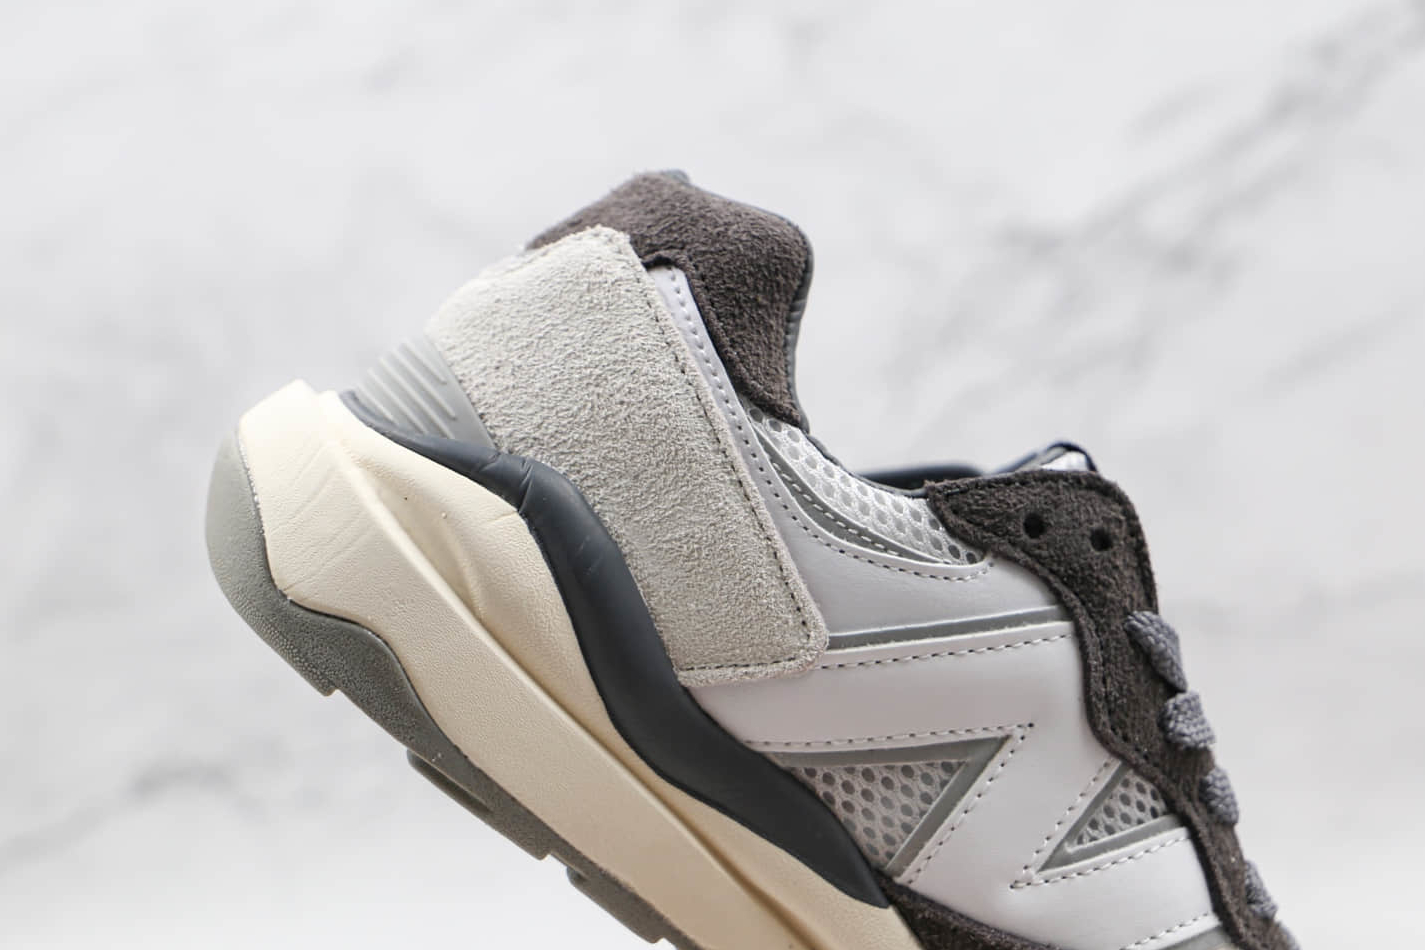 New Balance 57 40 'Grey Black' Exclusive M5740SP1 – Premium Sneakers for Style and Comfort